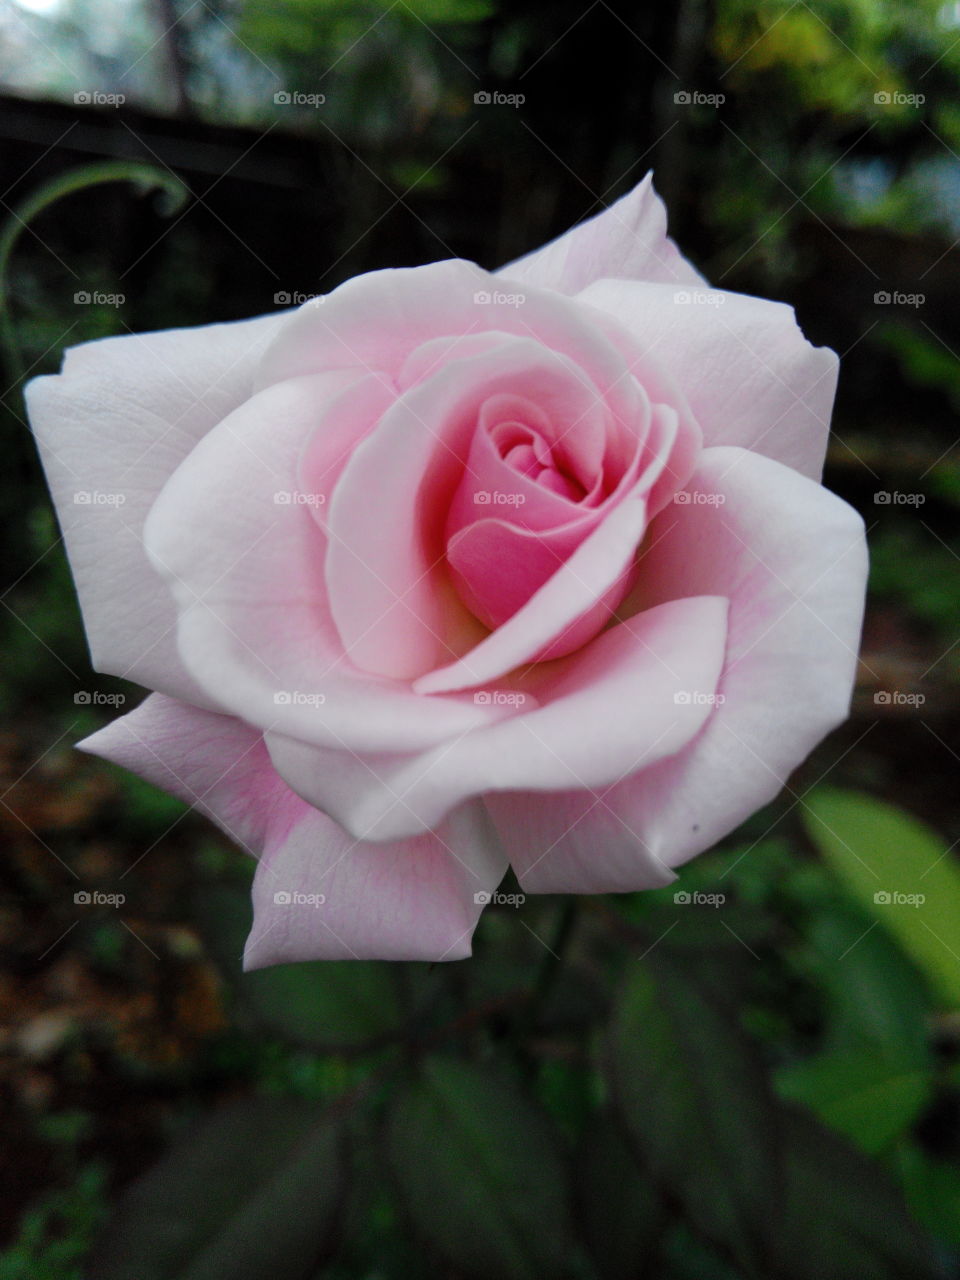 A  rosy rose